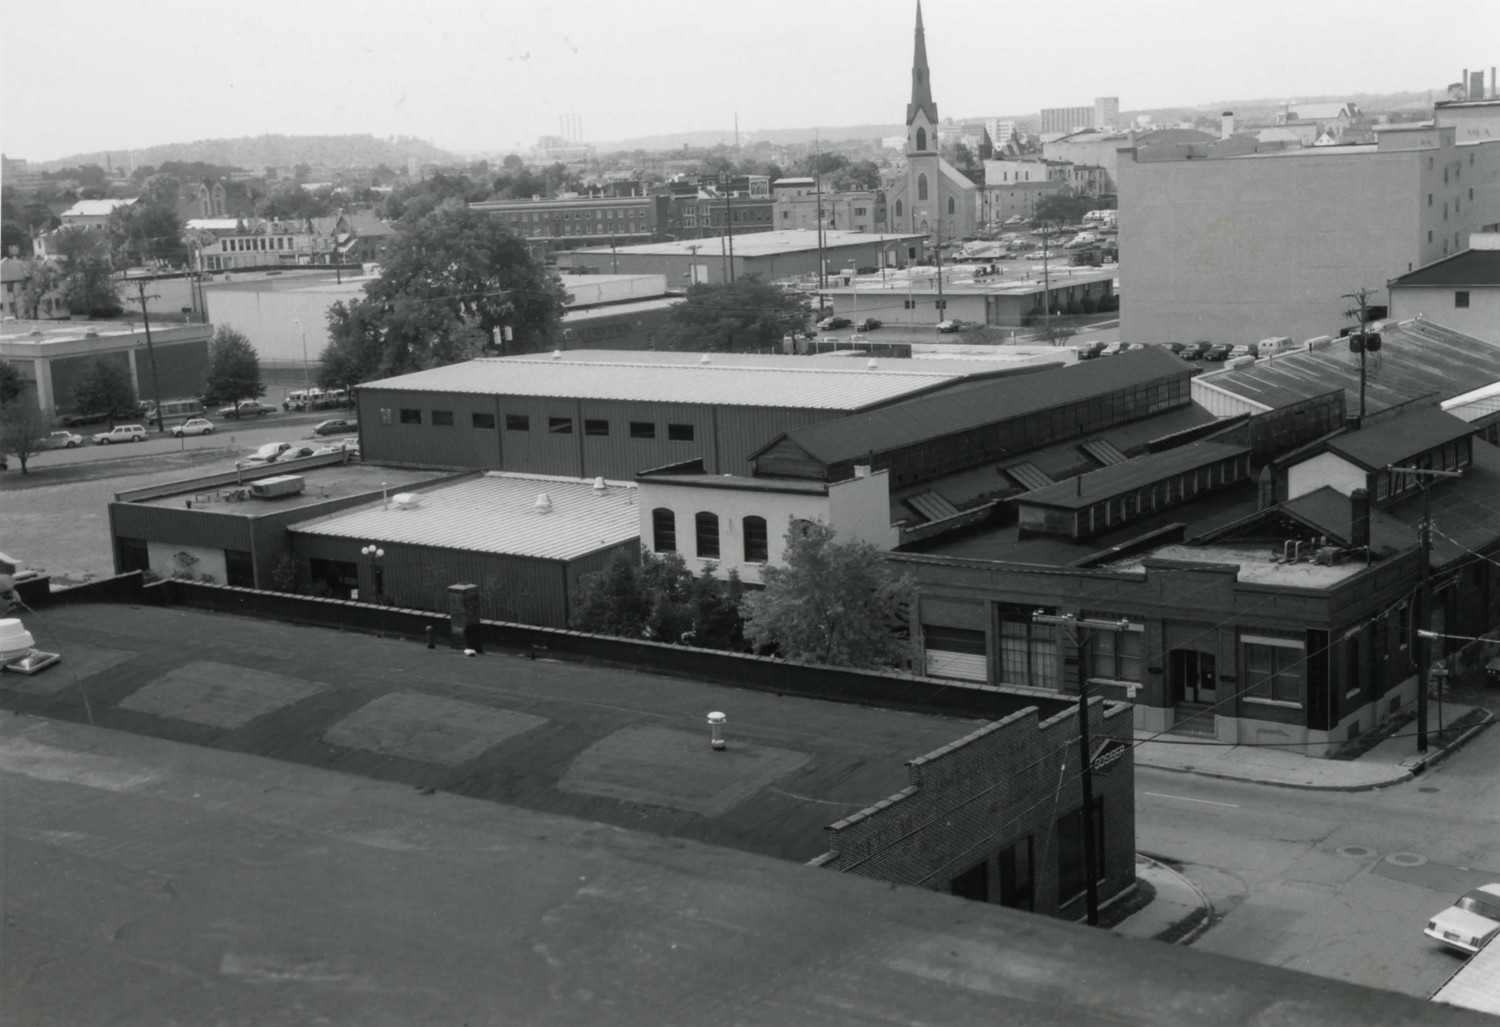 Dayton Motor Car Company, Dayton Ohio Looking southwest toward Oregon District, which is behind the church with spire. Buildings #7a, #4, #3, #2a & b between photographer and church (1983)